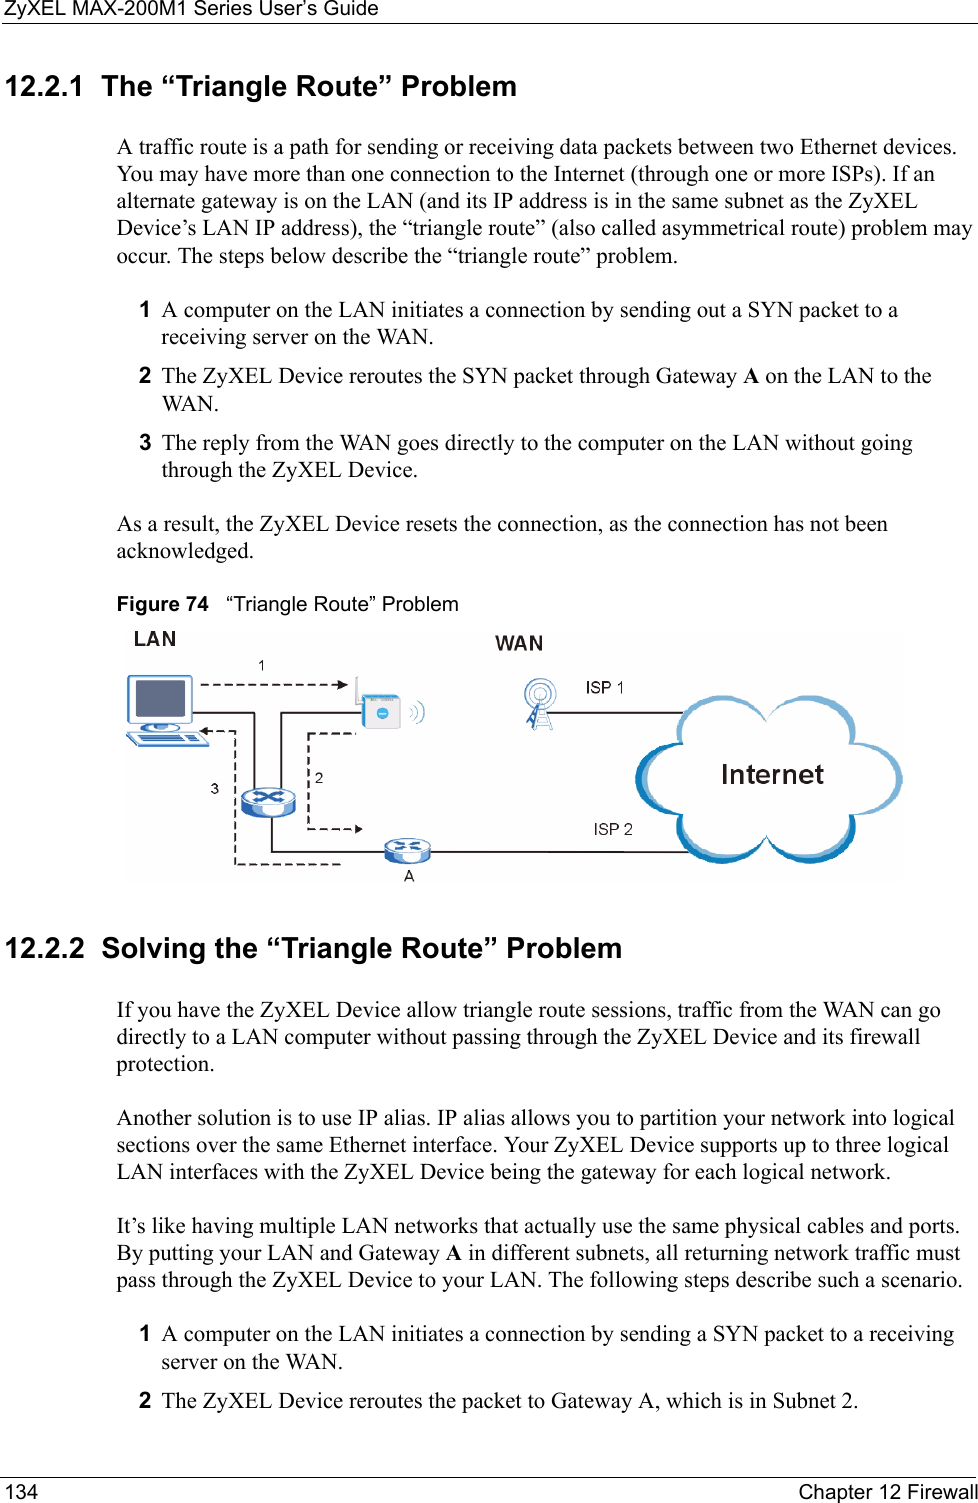 ZyXEL MAX-200M1 Series User’s Guide134 Chapter 12 Firewall12.2.1  The “Triangle Route” ProblemA traffic route is a path for sending or receiving data packets between two Ethernet devices. You may have more than one connection to the Internet (through one or more ISPs). If an alternate gateway is on the LAN (and its IP address is in the same subnet as the ZyXEL Device’s LAN IP address), the “triangle route” (also called asymmetrical route) problem may occur. The steps below describe the “triangle route” problem. 1A computer on the LAN initiates a connection by sending out a SYN packet to a receiving server on the WAN.2The ZyXEL Device reroutes the SYN packet through Gateway A on the LAN to the WA N. 3The reply from the WAN goes directly to the computer on the LAN without going through the ZyXEL Device. As a result, the ZyXEL Device resets the connection, as the connection has not been acknowledged.Figure 74   “Triangle Route” Problem12.2.2  Solving the “Triangle Route” ProblemIf you have the ZyXEL Device allow triangle route sessions, traffic from the WAN can go directly to a LAN computer without passing through the ZyXEL Device and its firewall protection. Another solution is to use IP alias. IP alias allows you to partition your network into logical sections over the same Ethernet interface. Your ZyXEL Device supports up to three logical LAN interfaces with the ZyXEL Device being the gateway for each logical network. It’s like having multiple LAN networks that actually use the same physical cables and ports. By putting your LAN and Gateway A in different subnets, all returning network traffic must pass through the ZyXEL Device to your LAN. The following steps describe such a scenario.1A computer on the LAN initiates a connection by sending a SYN packet to a receiving server on the WAN. 2The ZyXEL Device reroutes the packet to Gateway A, which is in Subnet 2. 